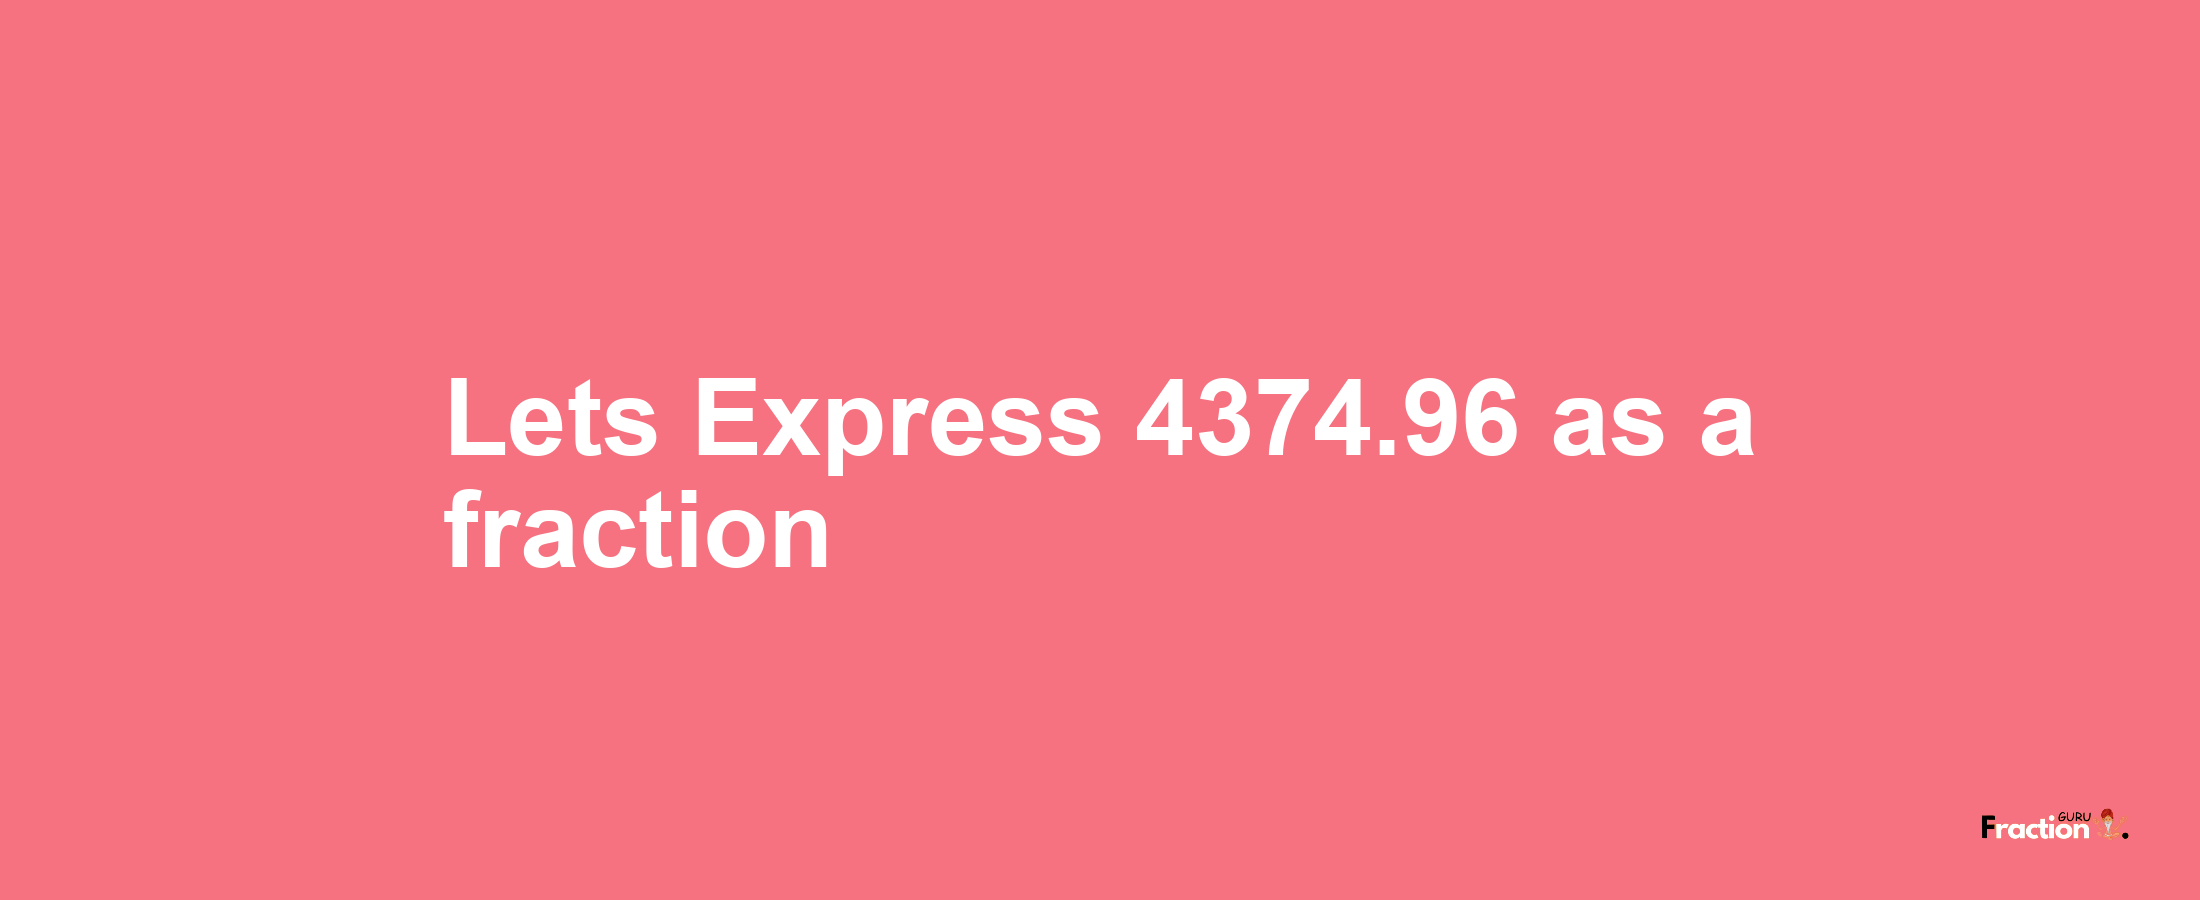 Lets Express 4374.96 as afraction